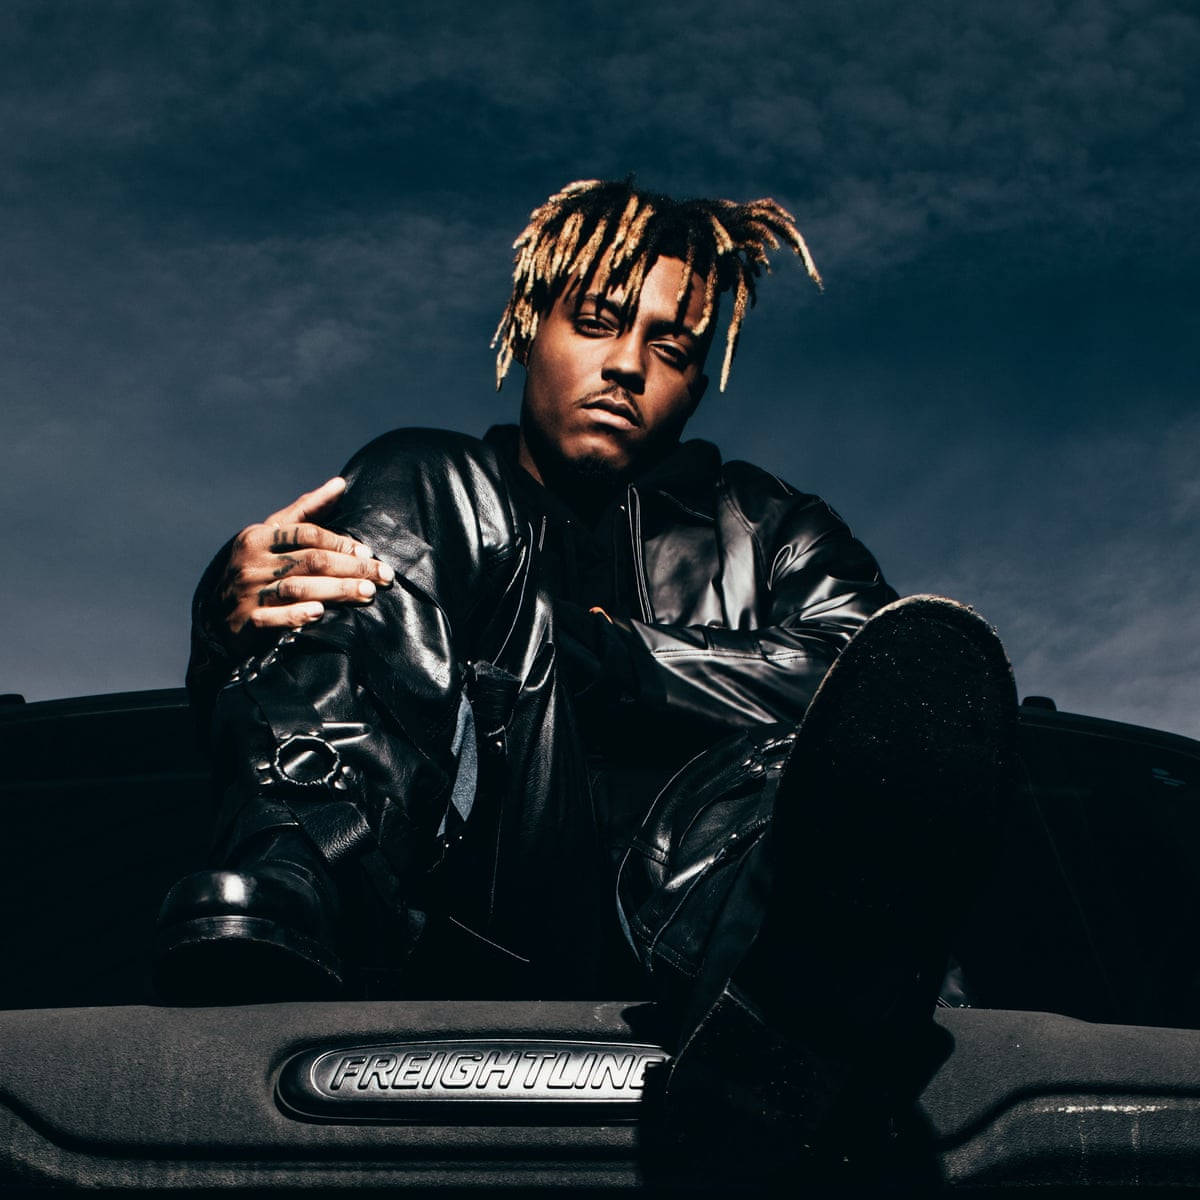 Captivating Image Of The Late Hip Hop Star, Juice Wrld Wallpaper